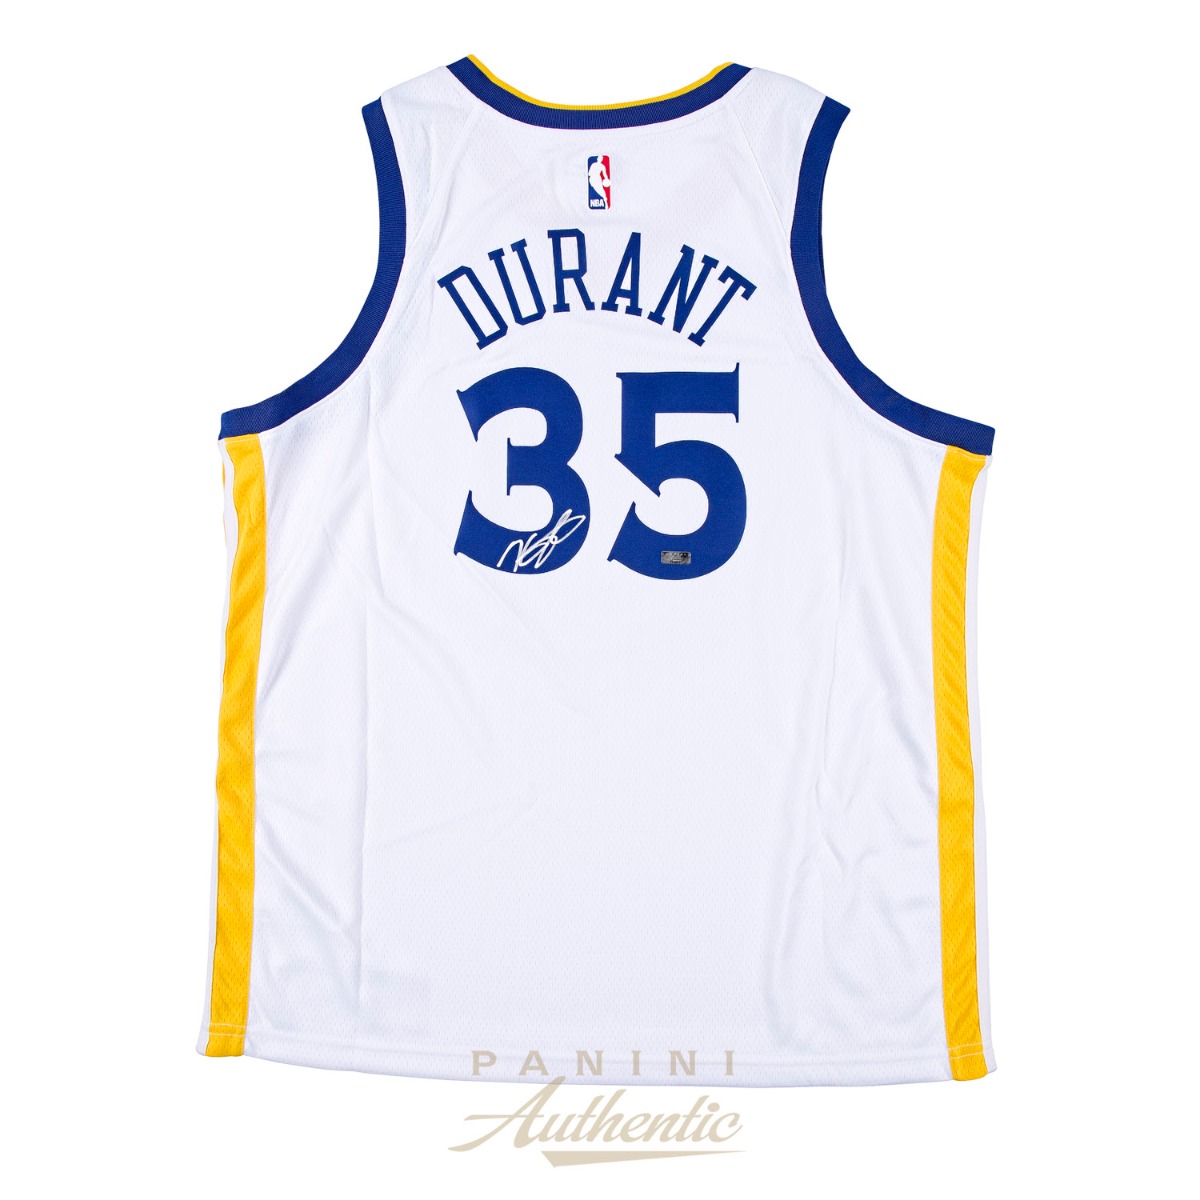 kevin durant usa 2017 jersey